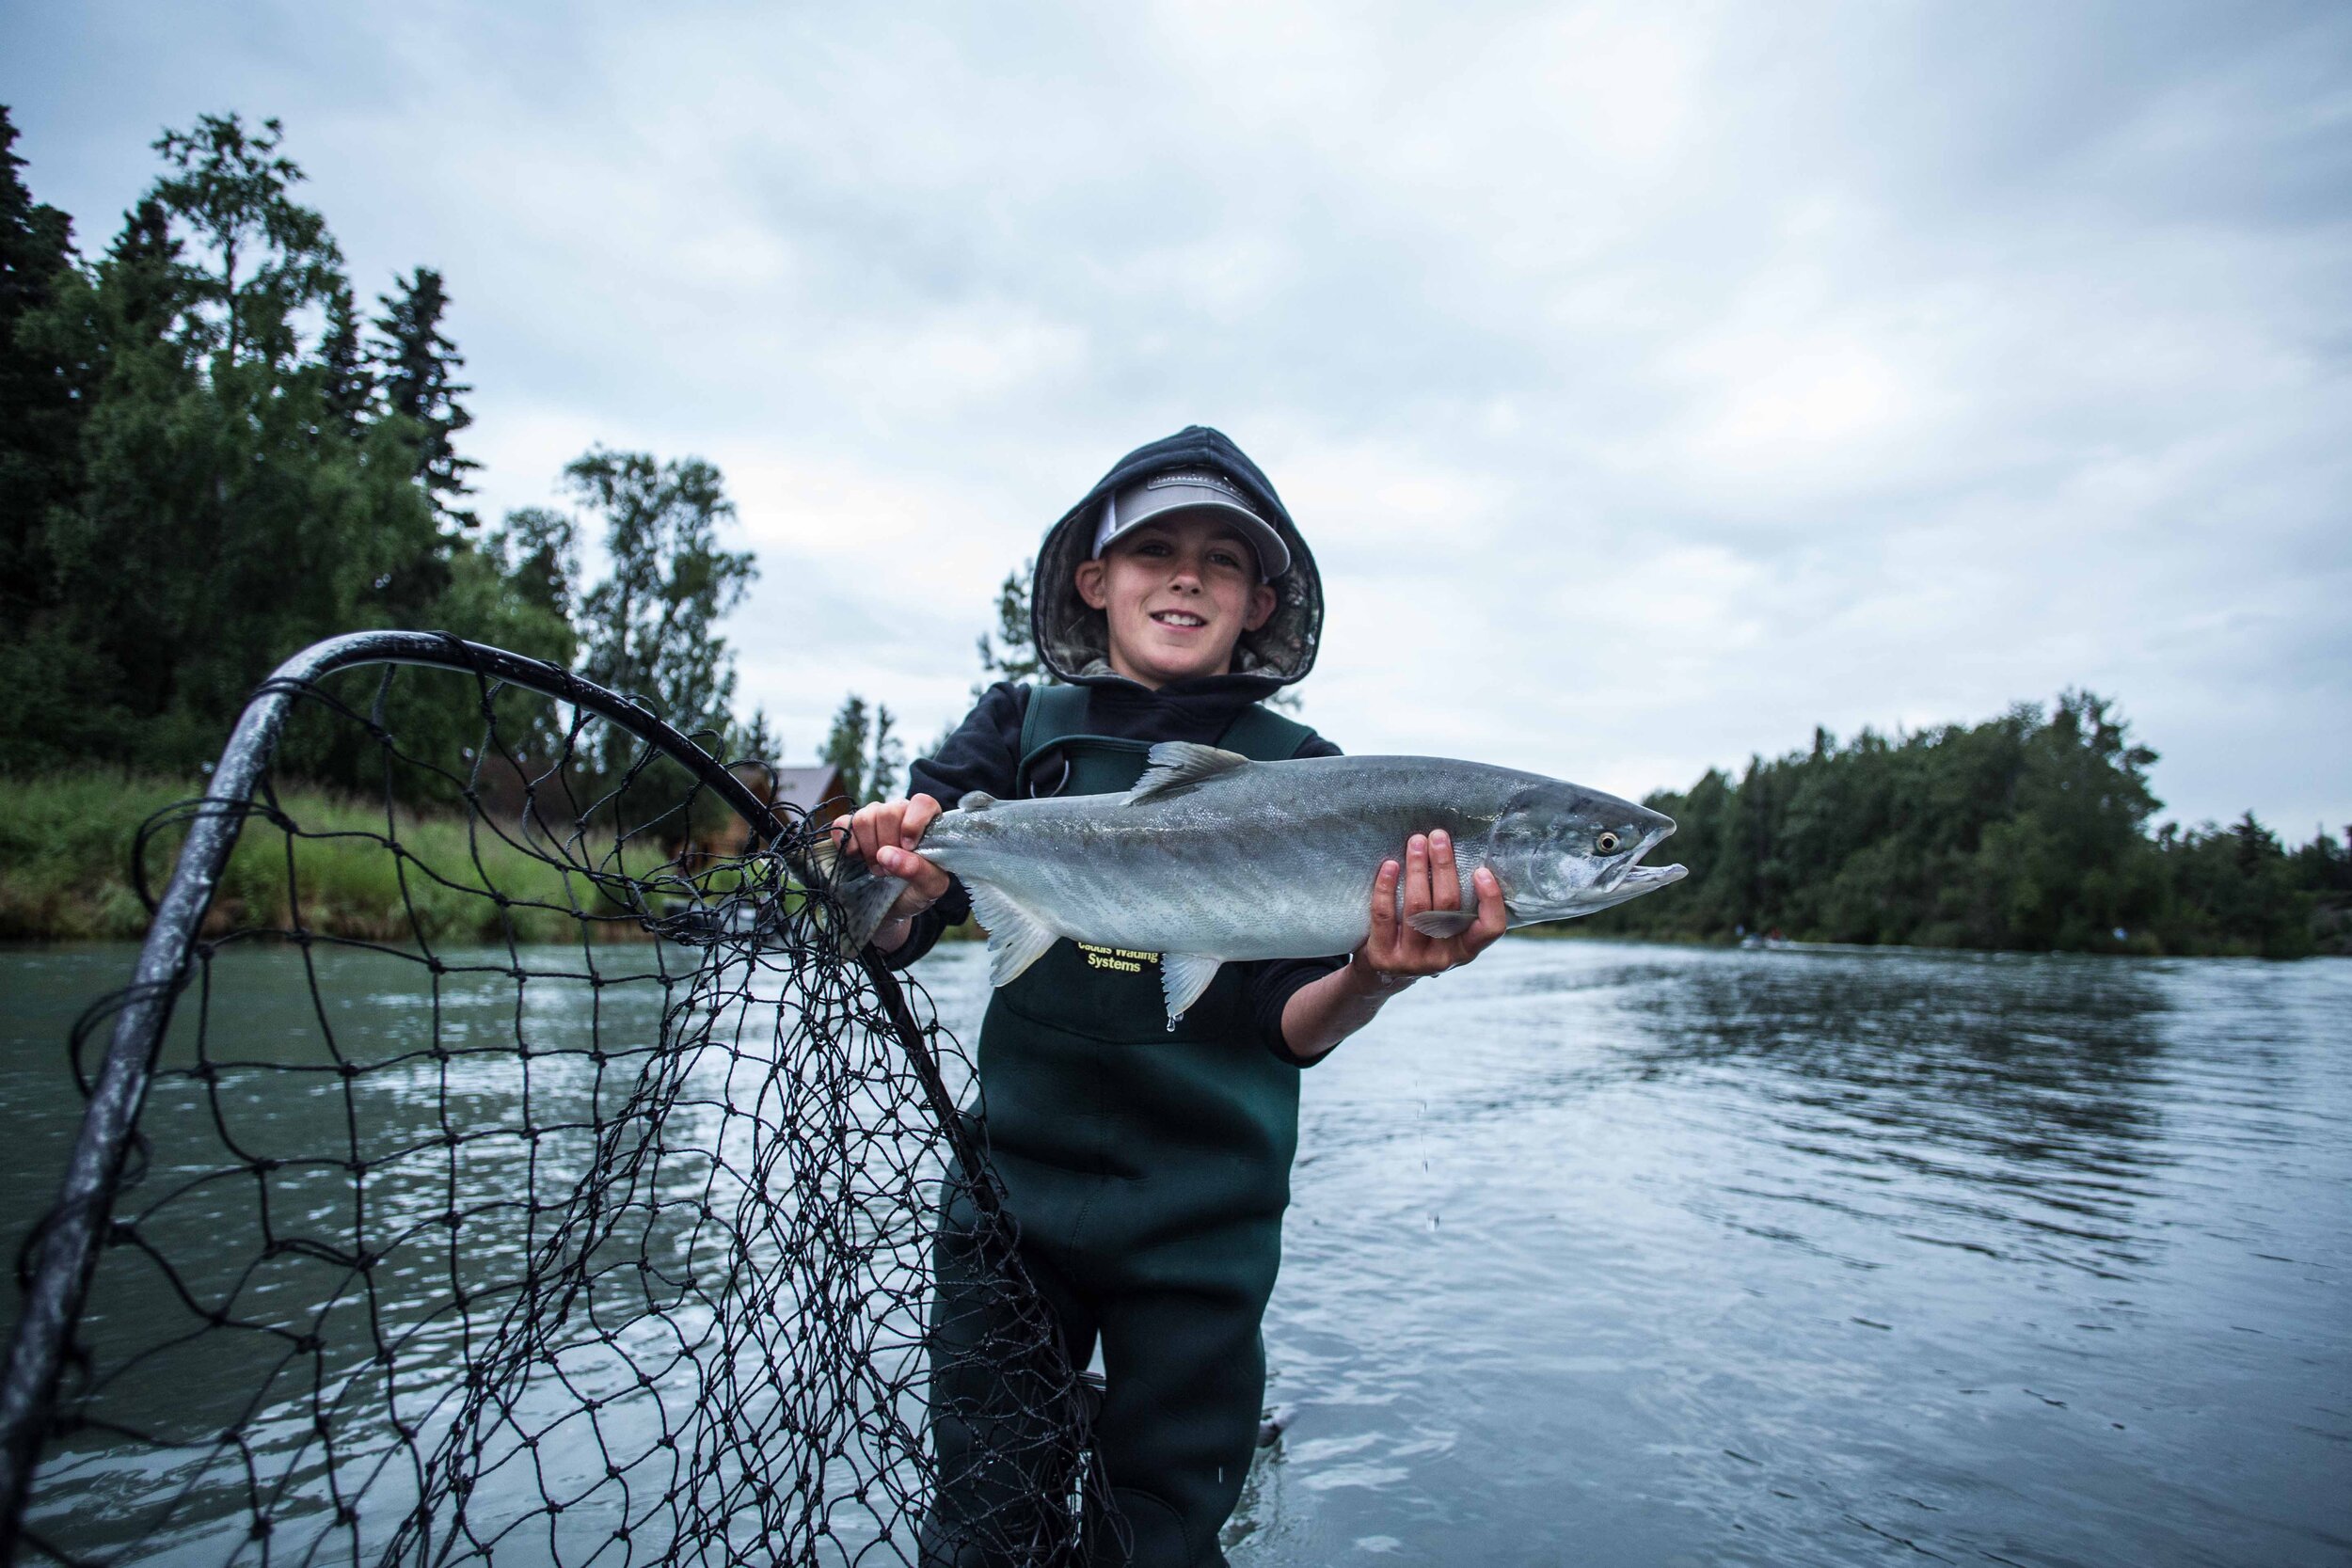 The Ultimate Guide To World Class Alaska Fishing